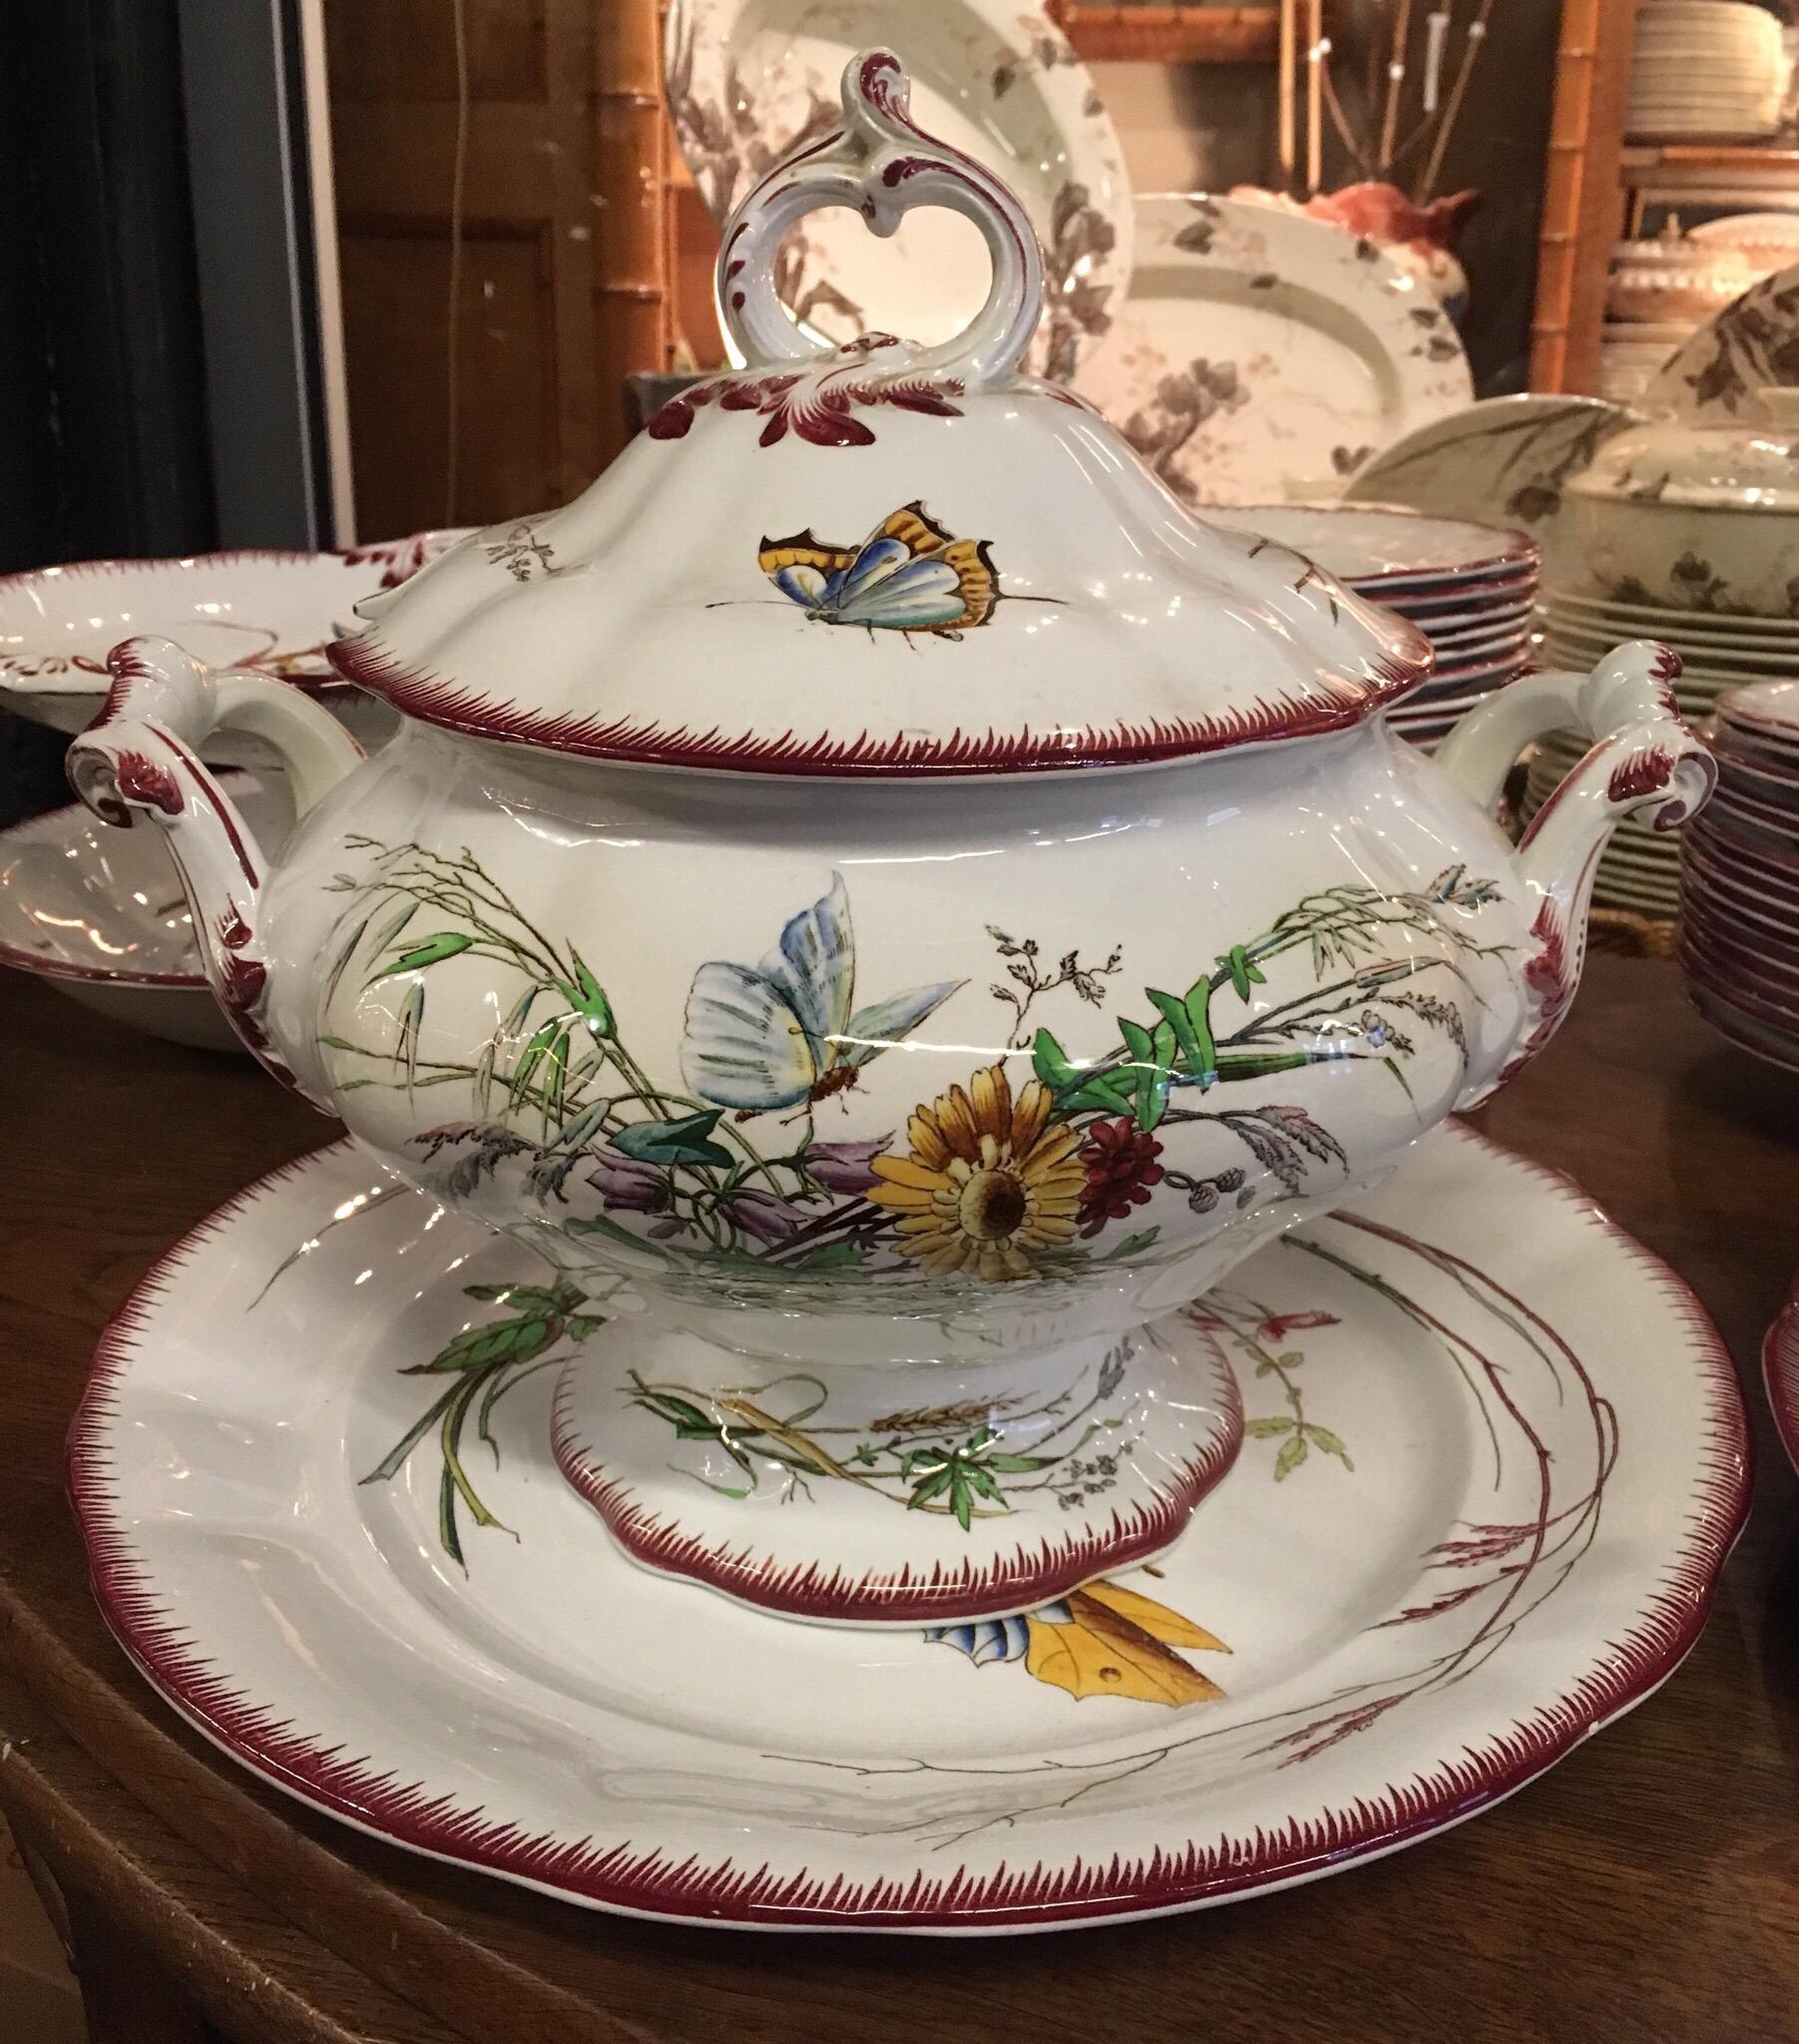 Sarreguemines, 19th century, France
Dinner table service. Butterfly pattern model.
Faience (or earthenware).

Around 65 pieces.
Details : 
24 regular plates
18 hollow plates
14 dessert plates
2 low cake plates
1 compotier 
1 hollow serving plate
1